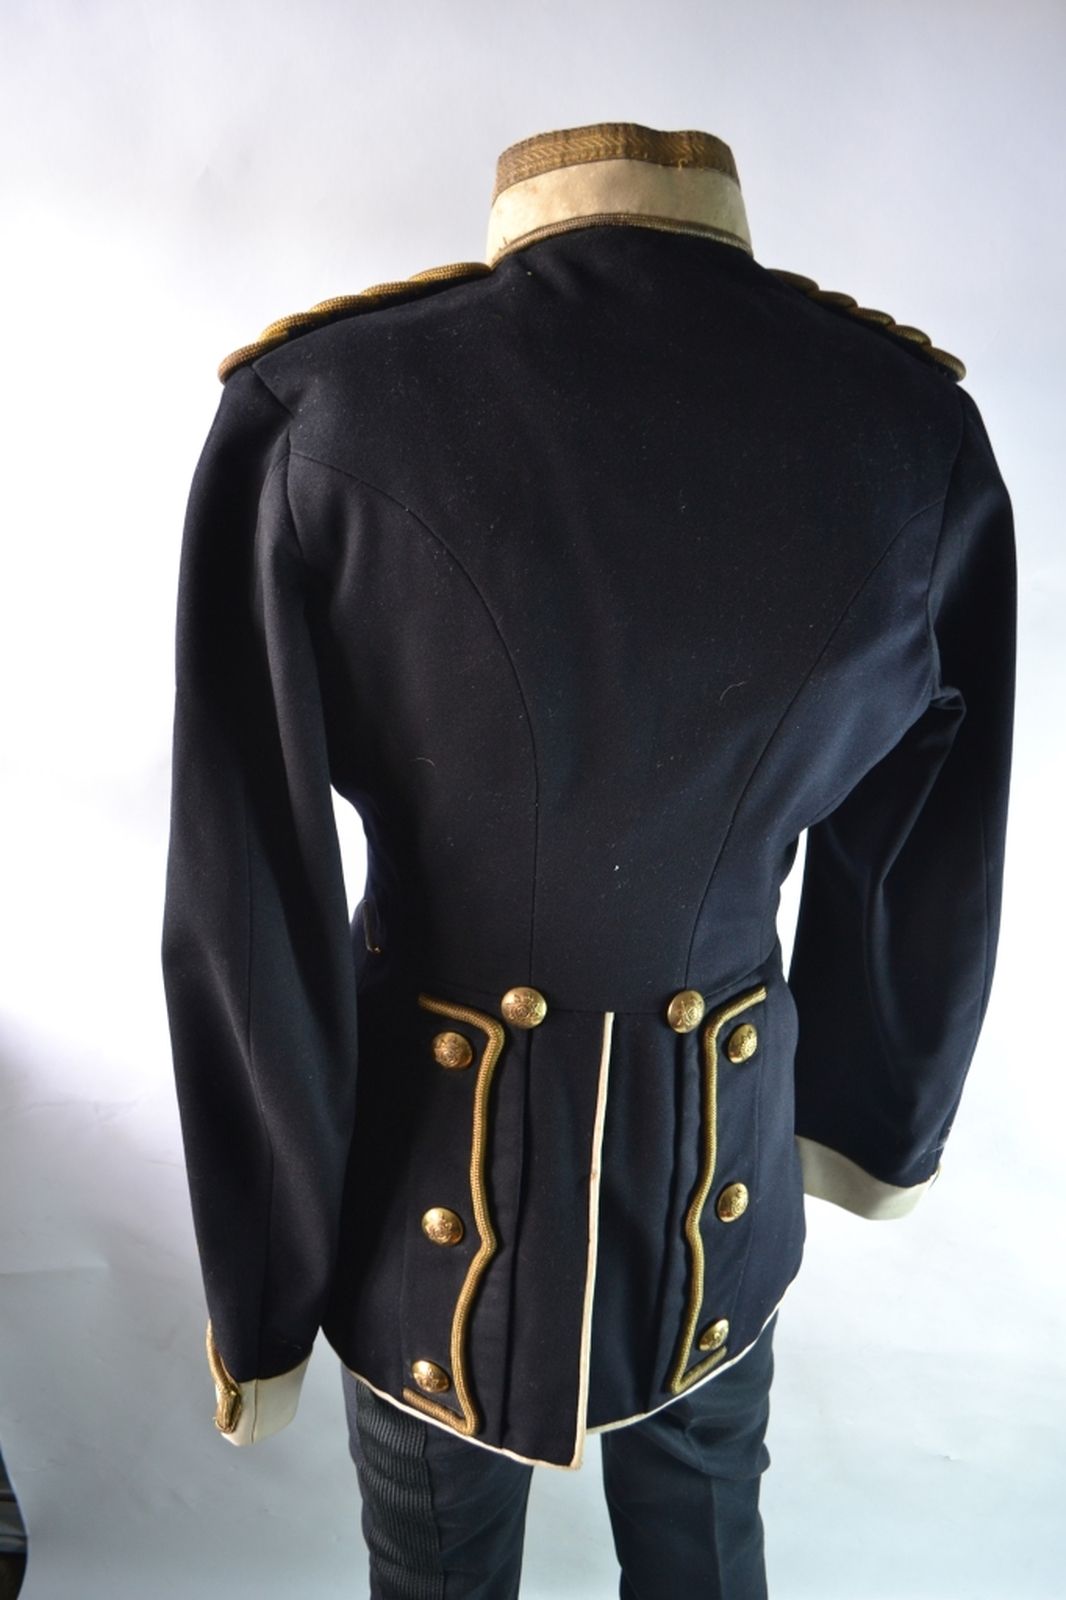 Post 1901 Army Service Corps Officers Tunic